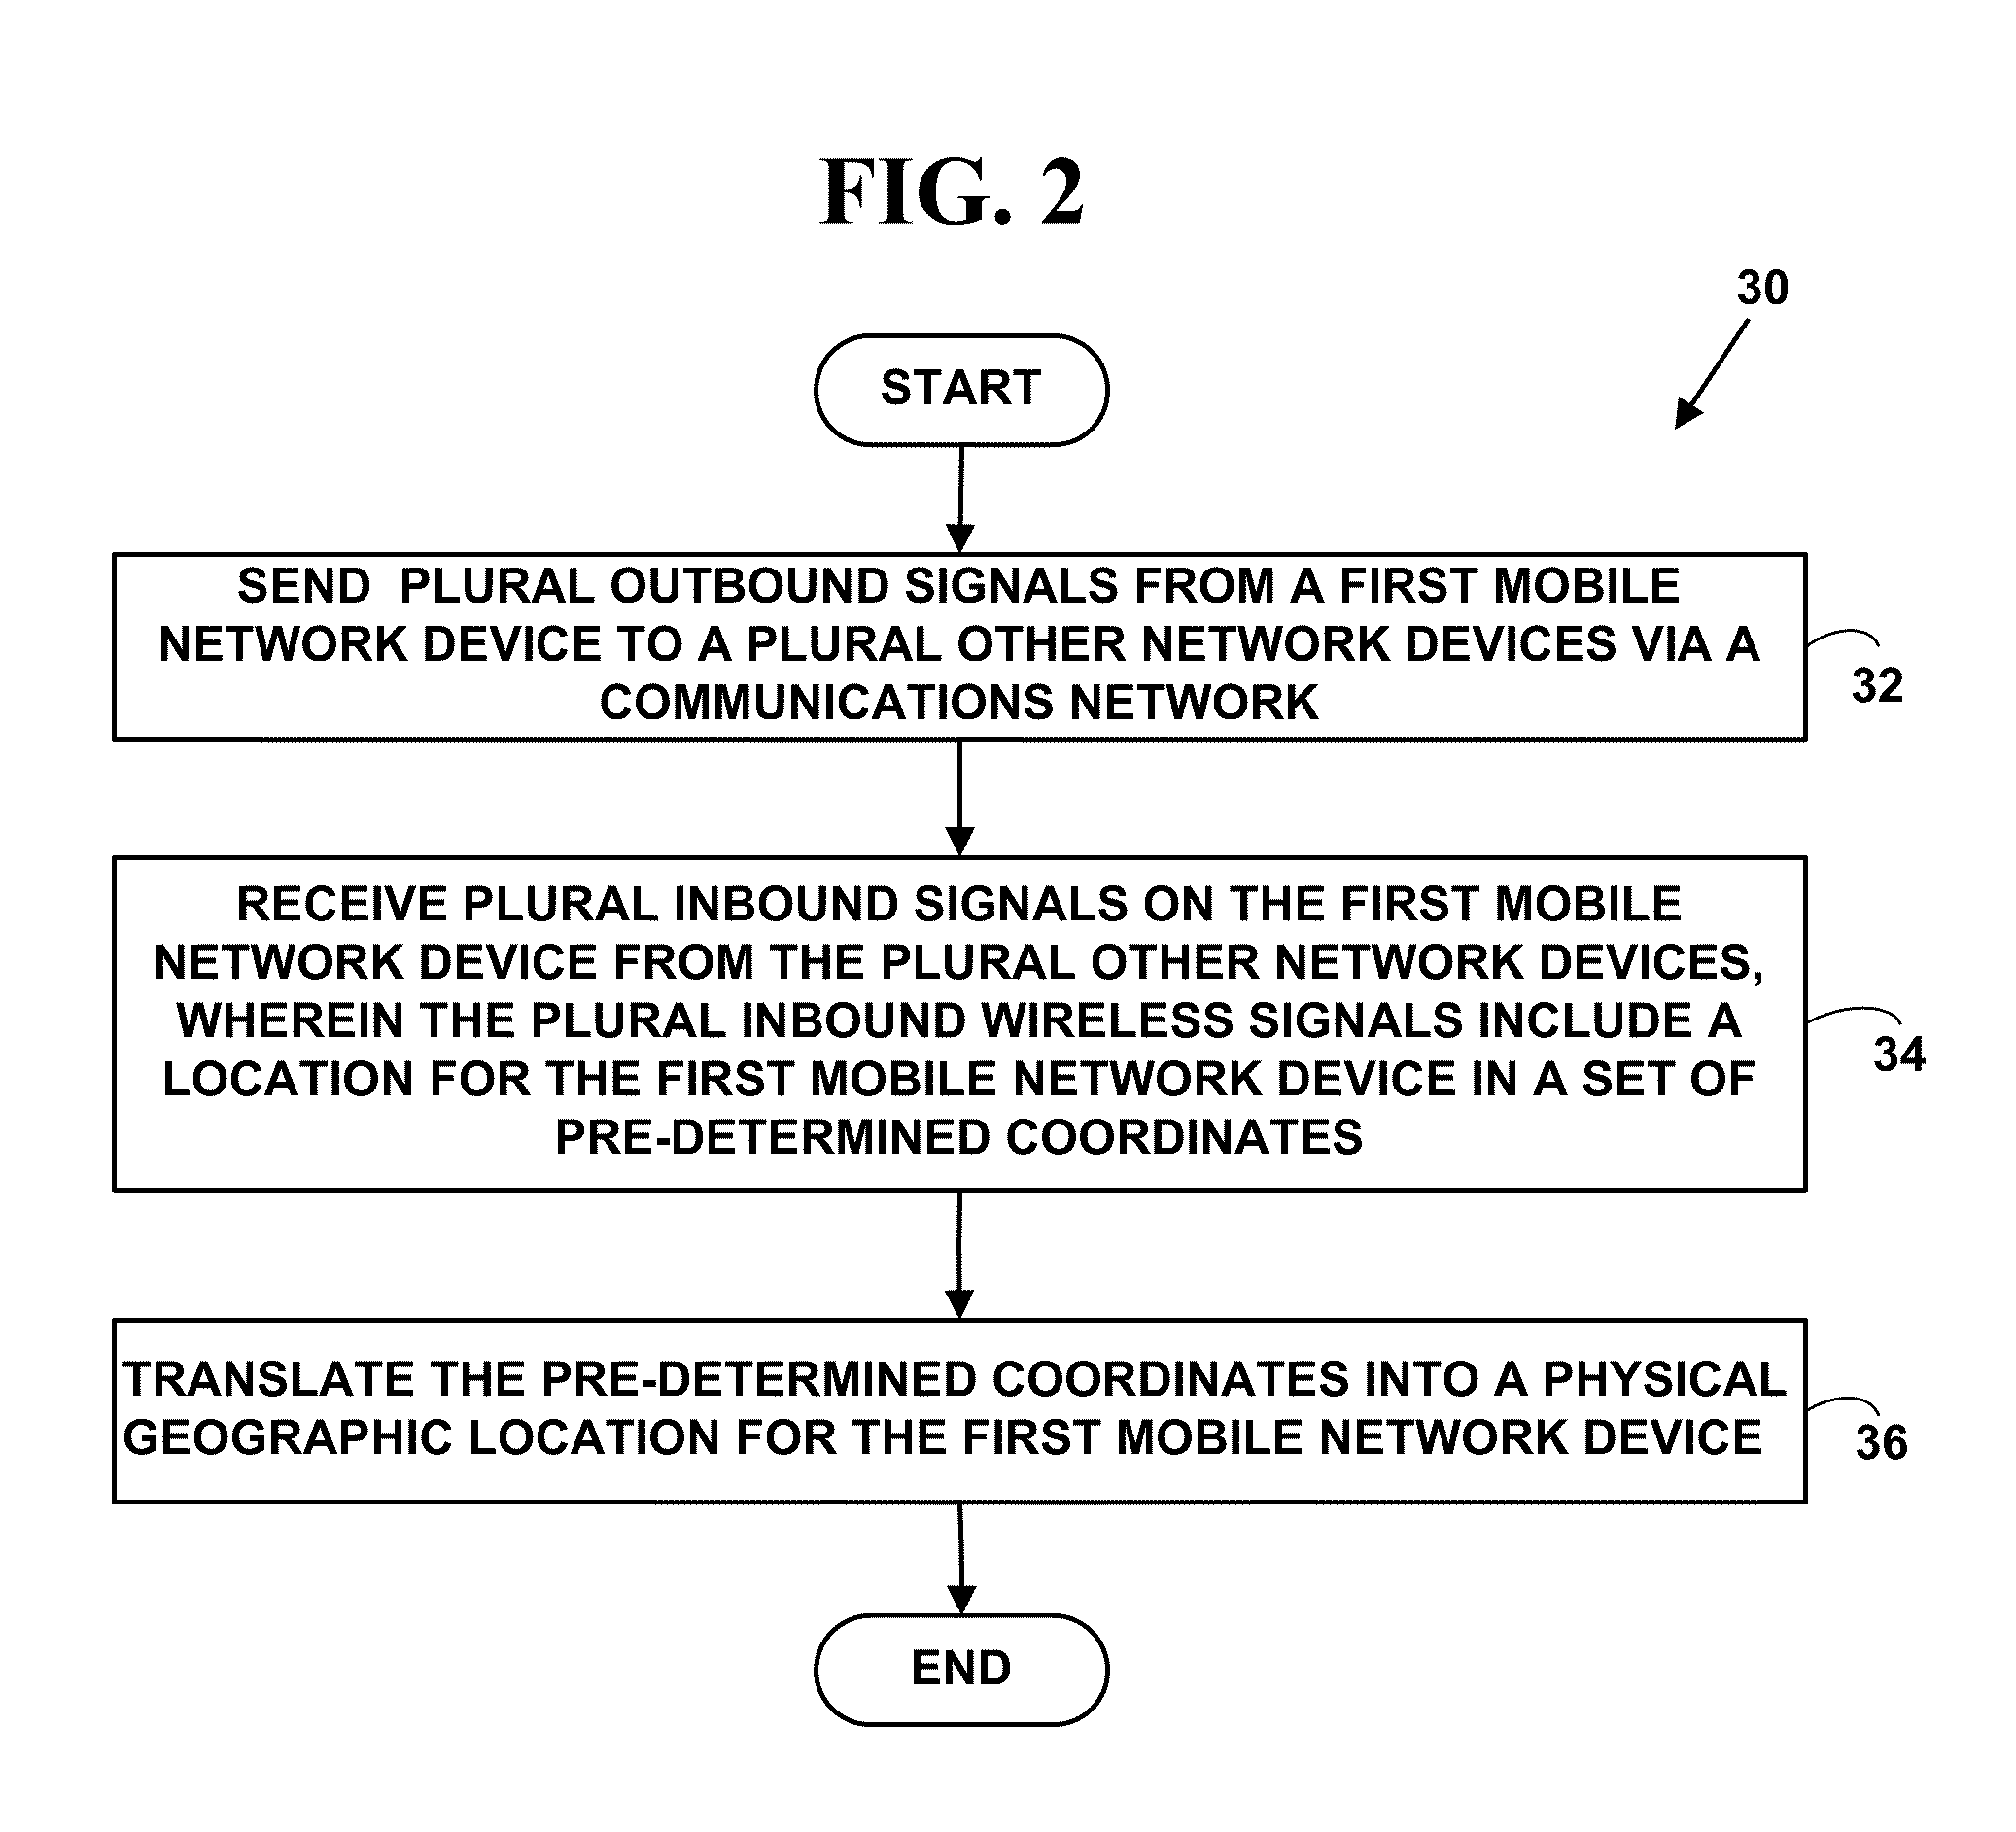 Method and system for an emergency location information service (e-lis)